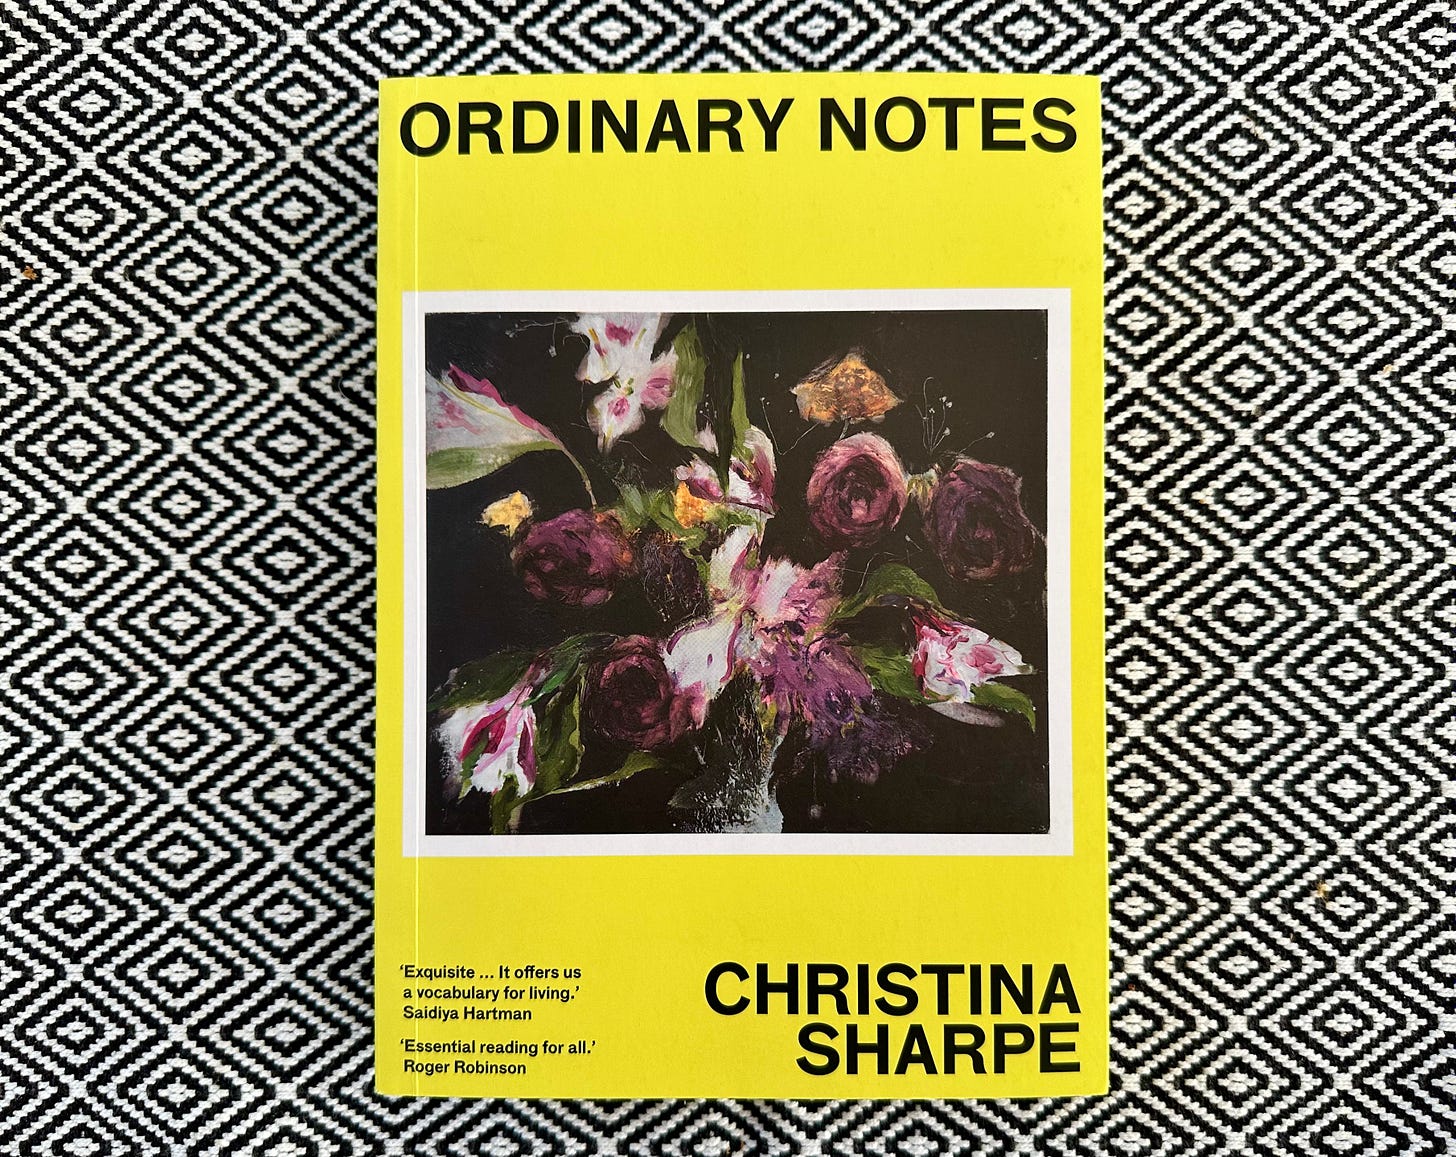 Picture of a book titled "Ordinary Notes", by Christina Sharpe, on a black and white diamond patterned cloth. The cover is a vibrant yellow, with the title and author appearing above and below an abstract untitled painting of flowers by the artist Jennifer Packer.